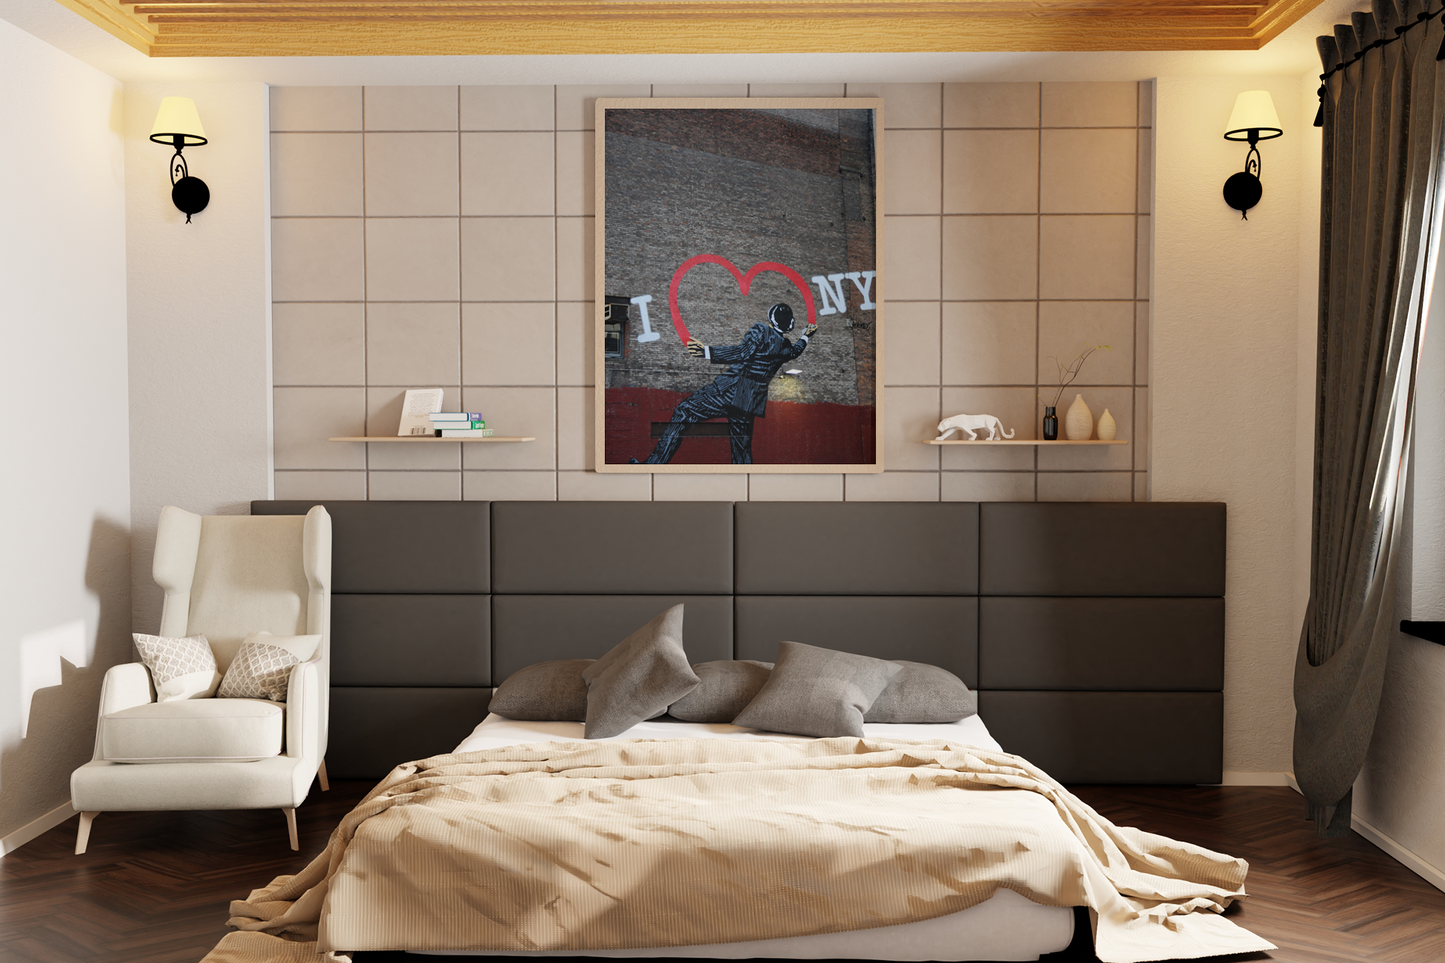 I love New York wall art by Mike Lindwasser